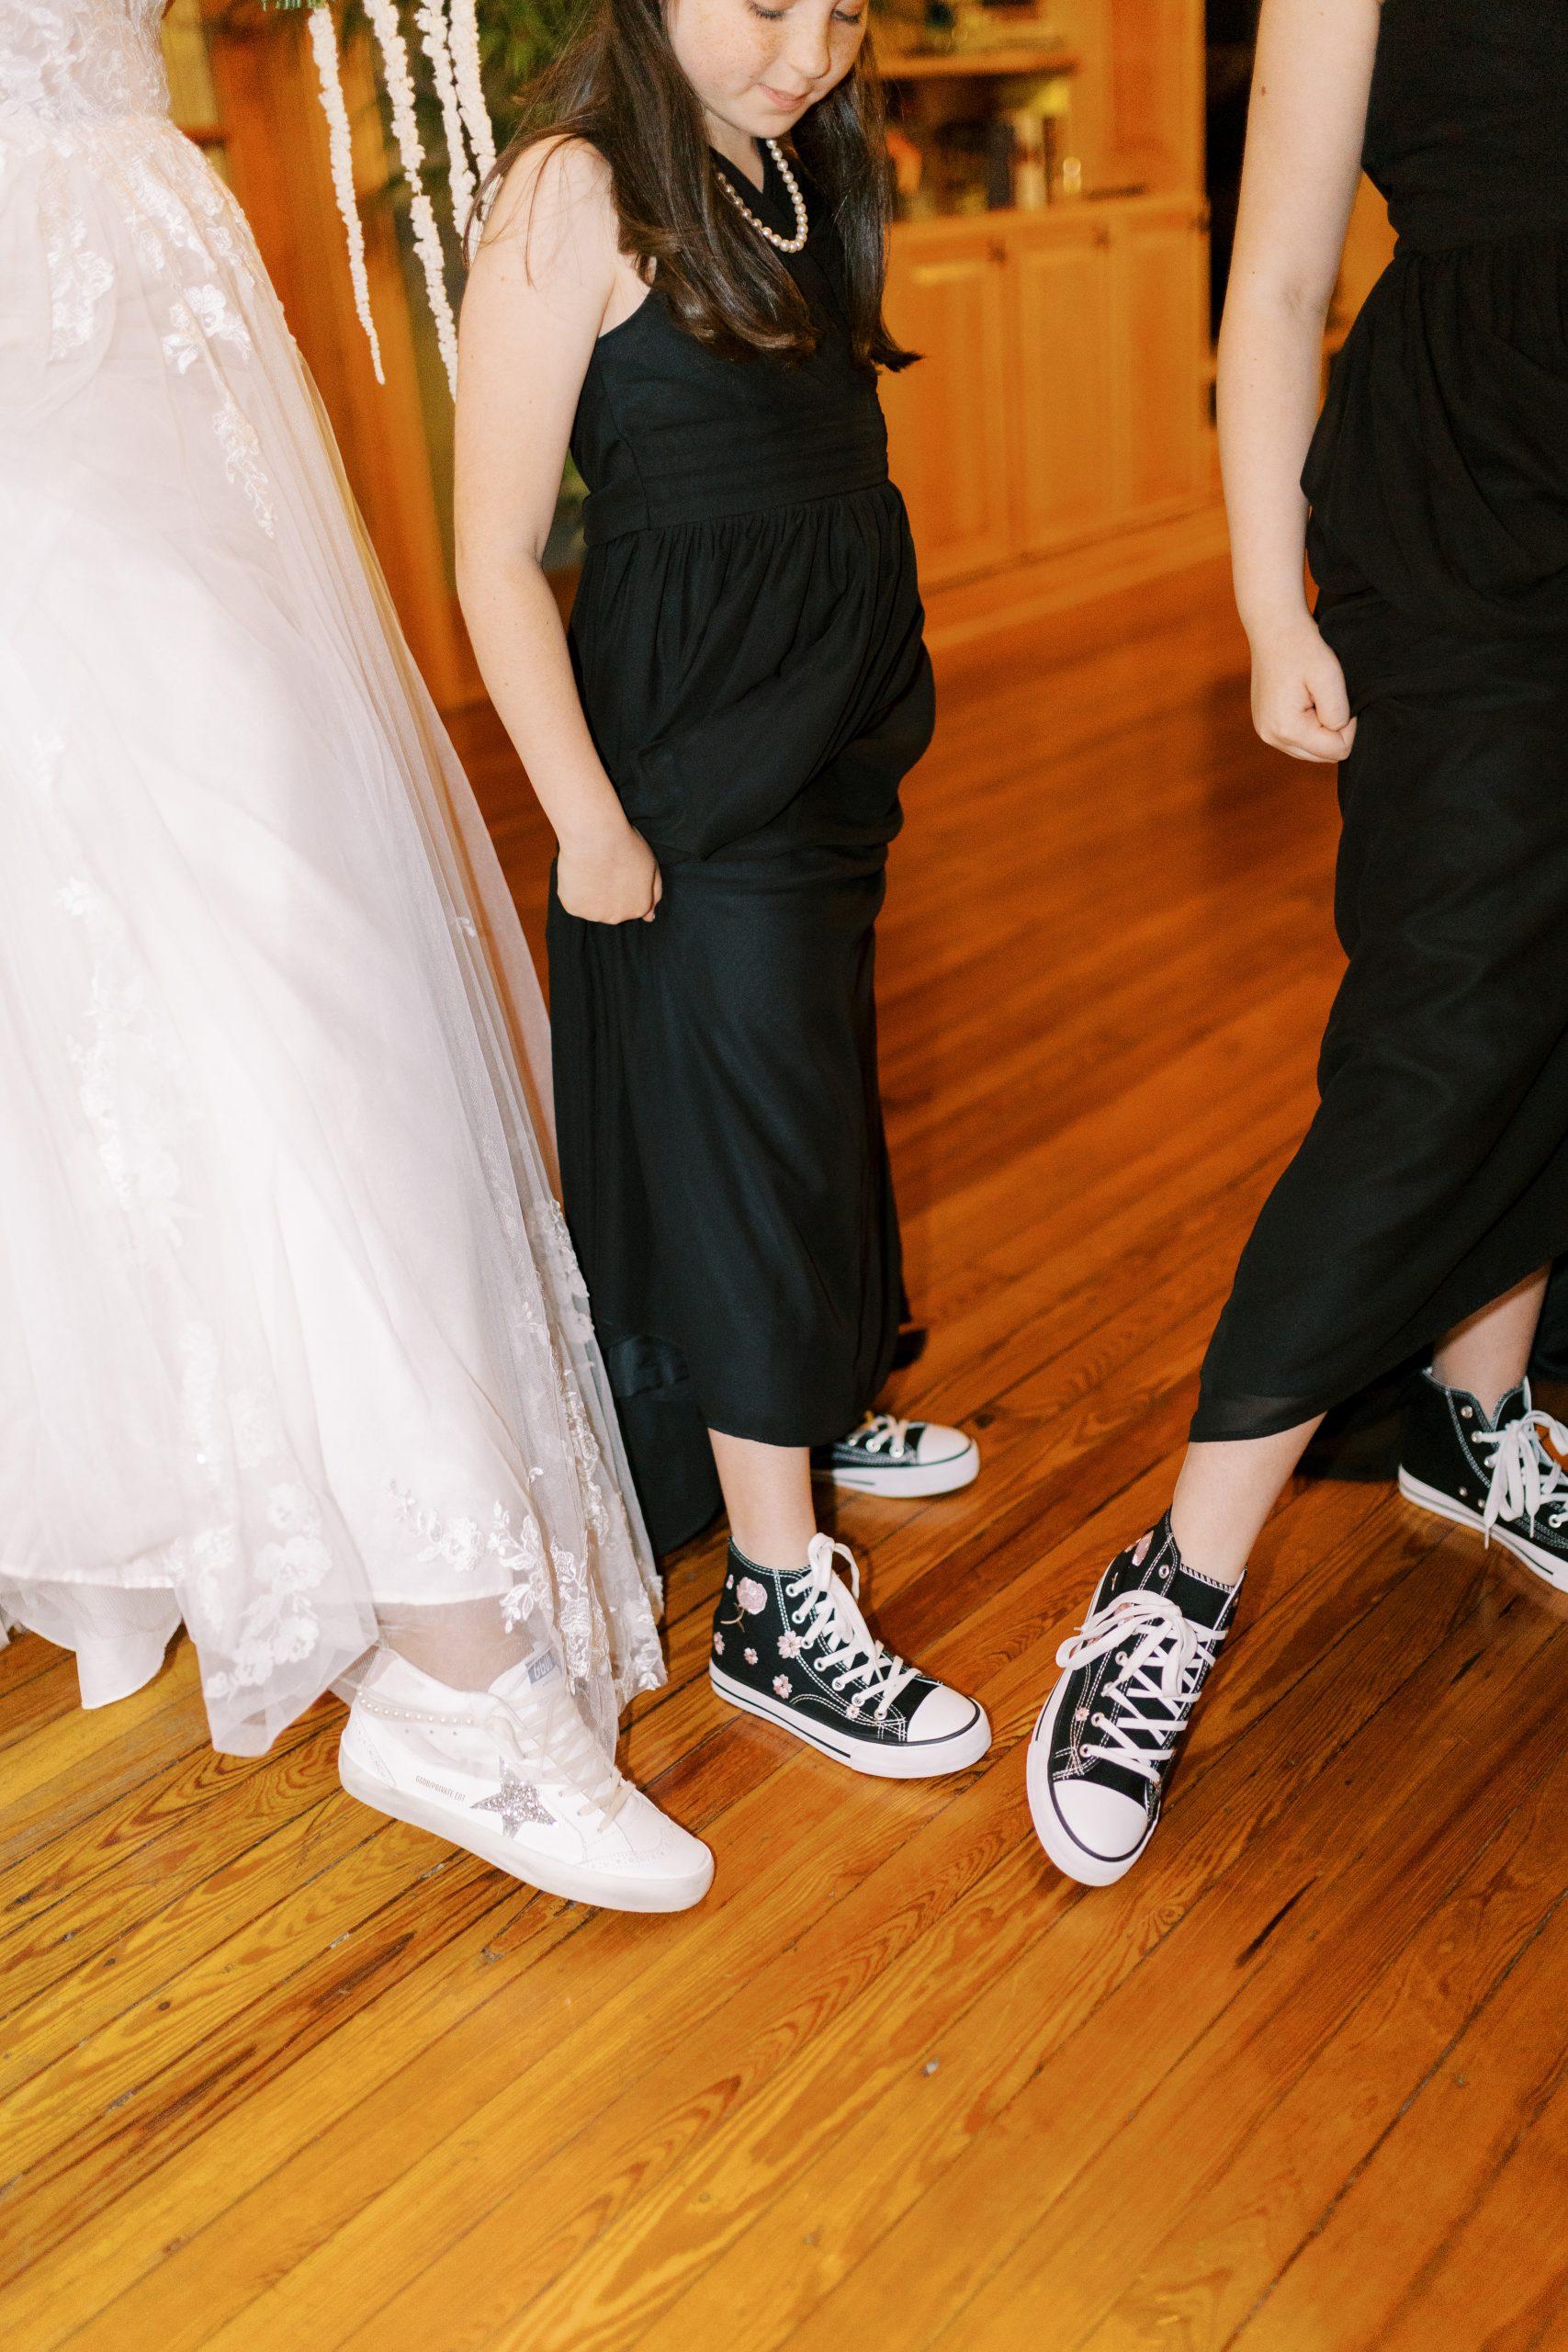 Bride Robin and her daughters show off their Converse sneakers under their dresses.